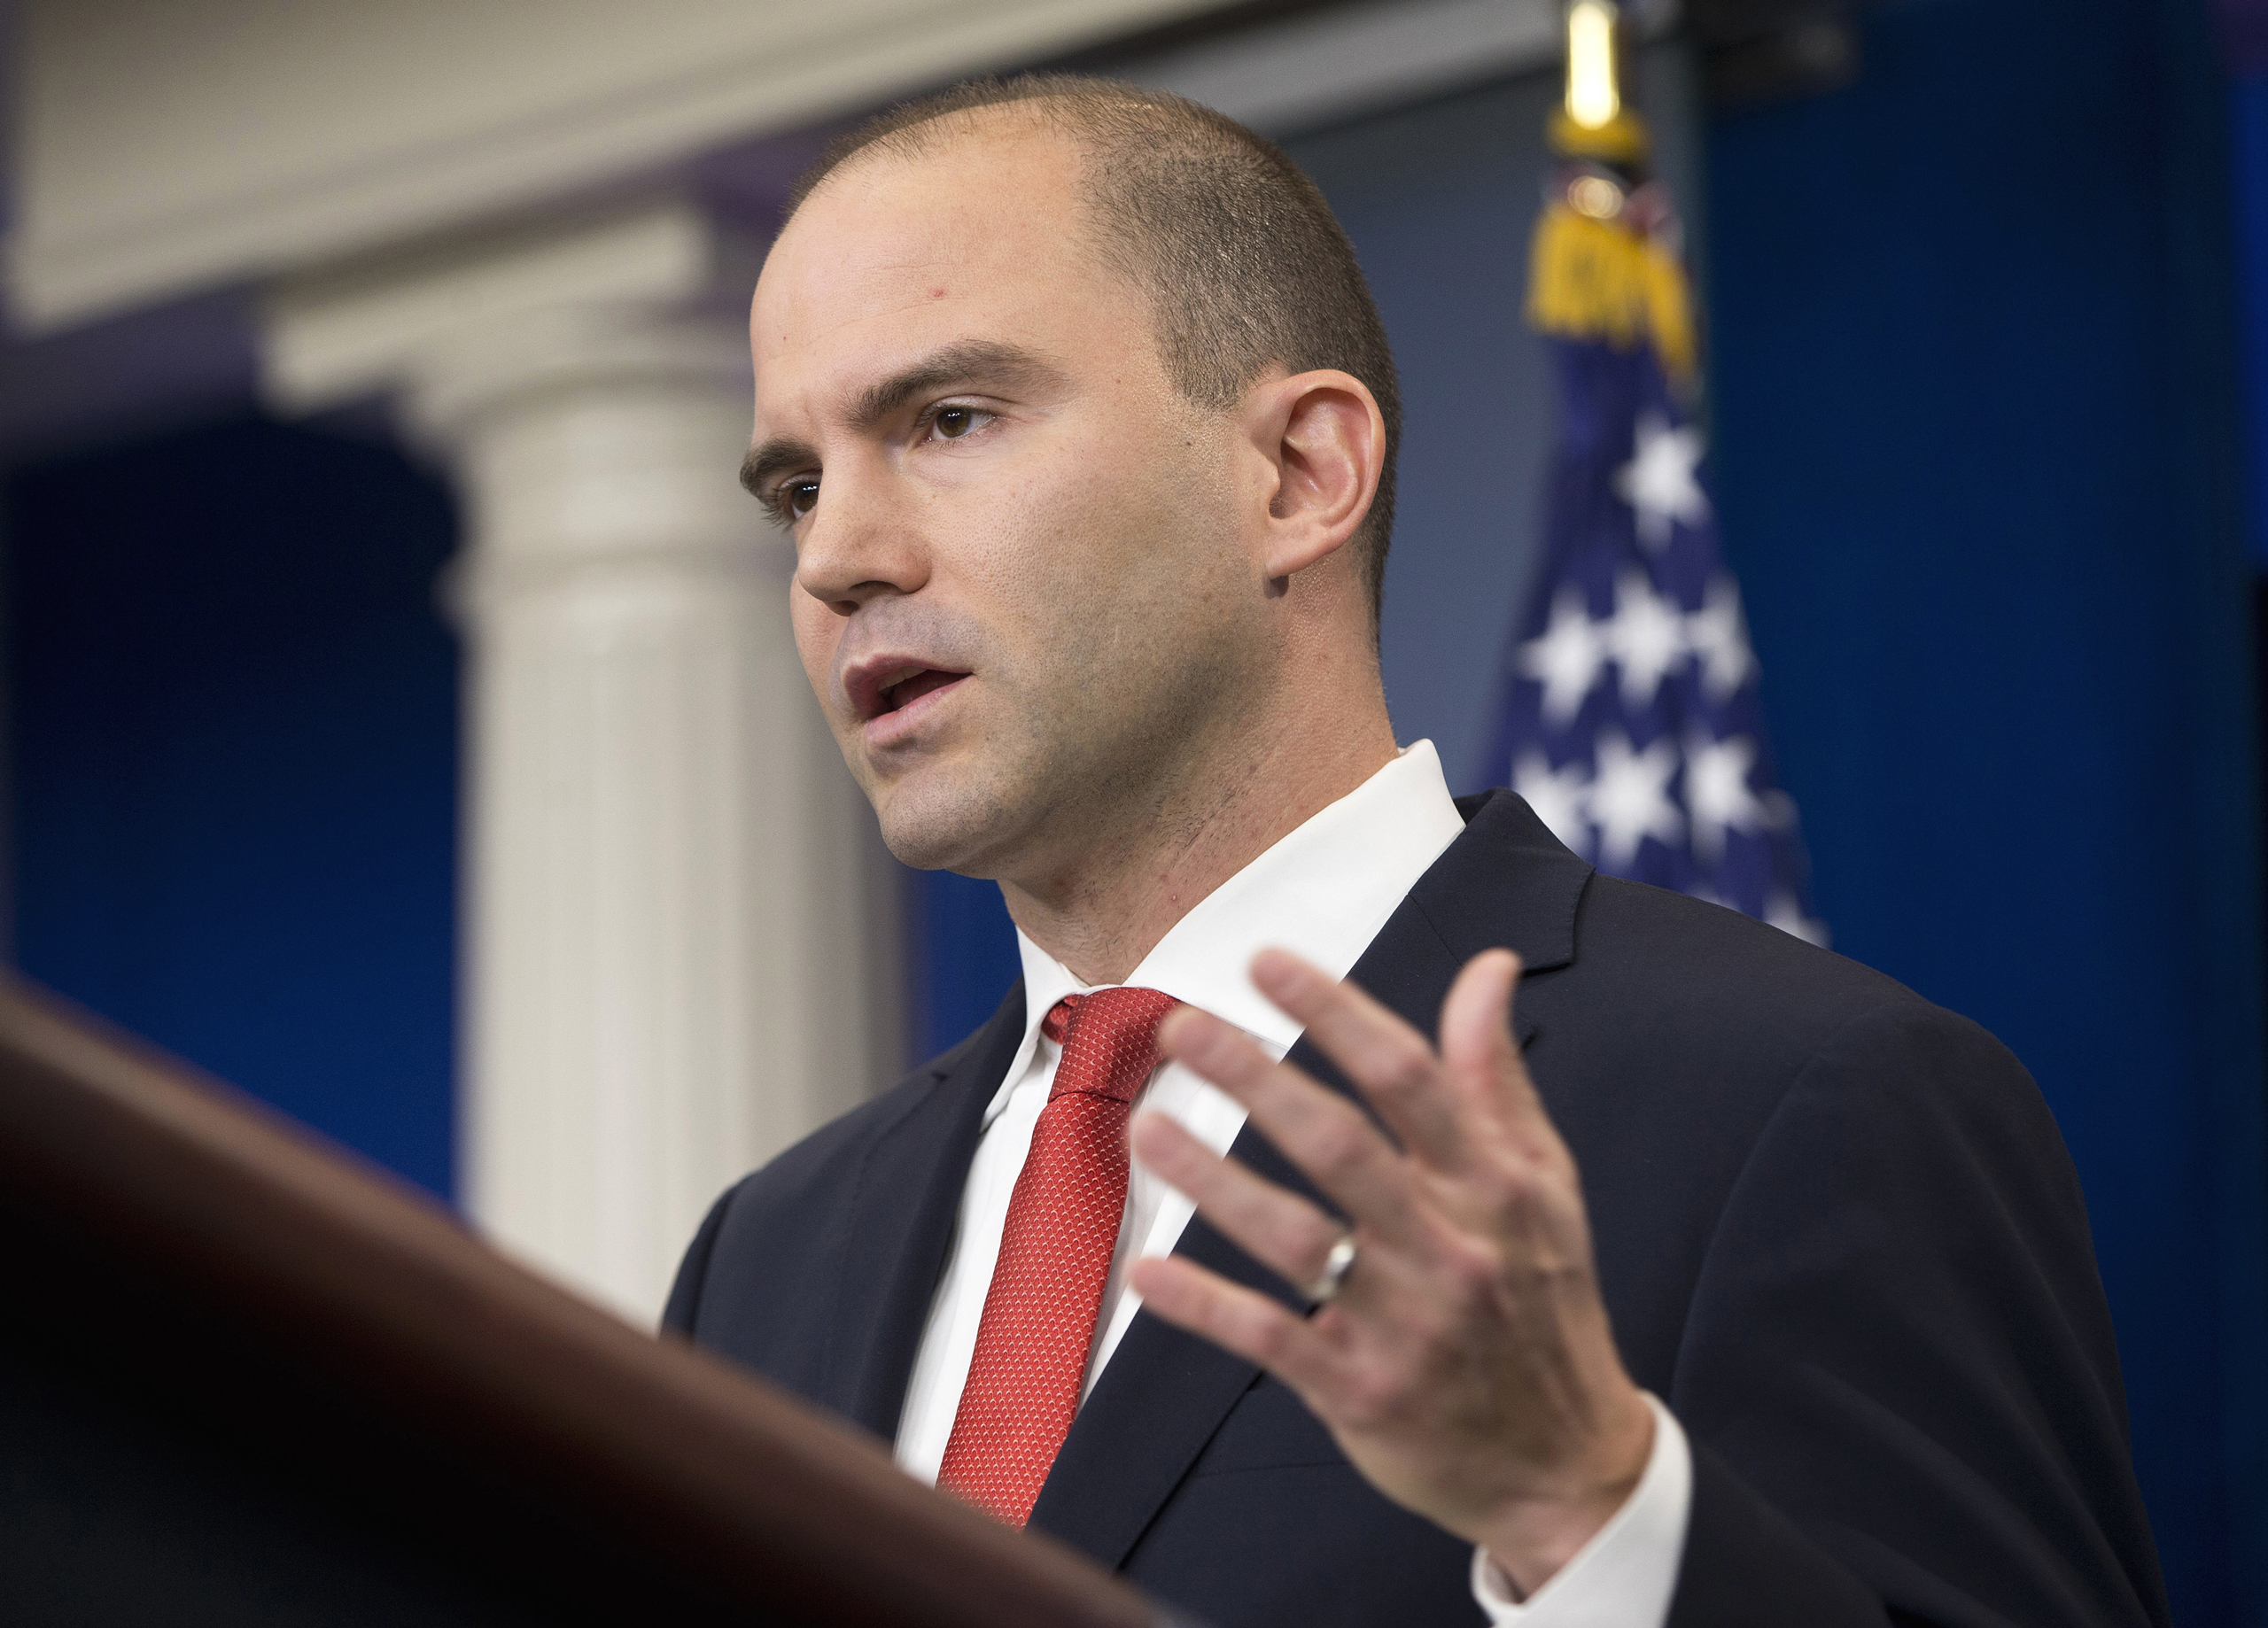 FILE - In this Feb. 16, 2016 file photo Deputy National Security Adviser For Strategic Communications Ben Rhodes speaks in the Brady Press Briefing Room of the White House in Washington. The White House is working to contain the damage caused by a magazine profile of one of President Barack Obama's top aides. In a blog post published late Sunday, May 8, 2016, Rhodes said the public relations campaign he created to sell the Iran nuclear deal was intended only "to push out facts." Rhodes says outside groups that participated "believed in the merits of the deal."  (AP Photo/Pablo Martinez Monsivais, File)